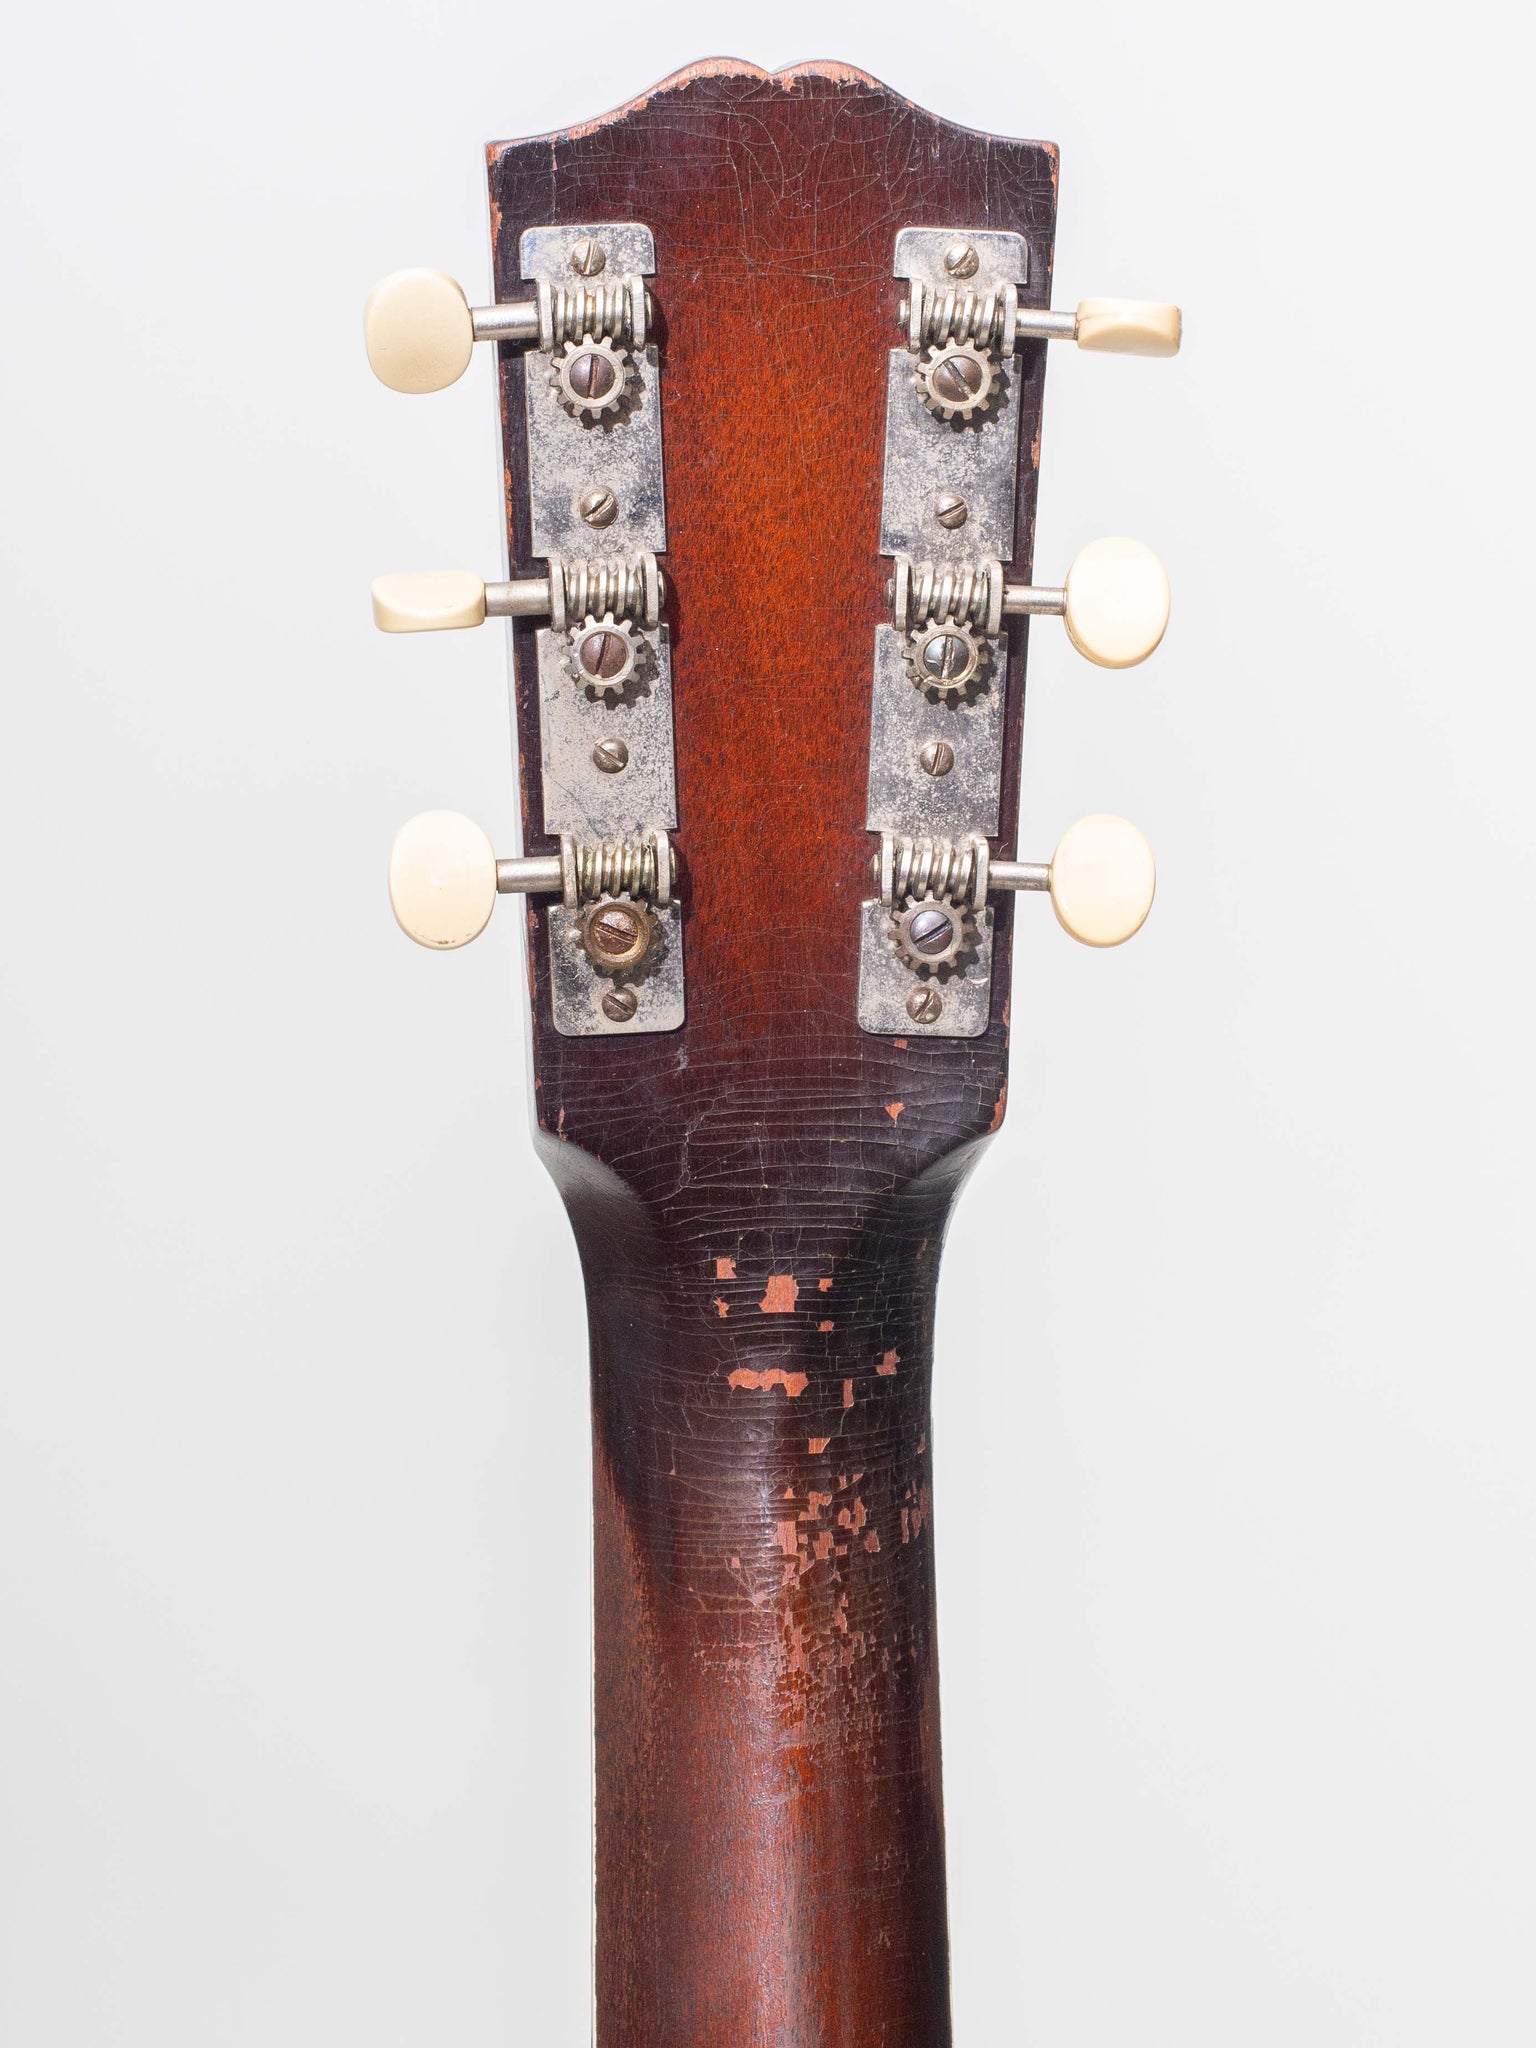 1933 Gibson L-75